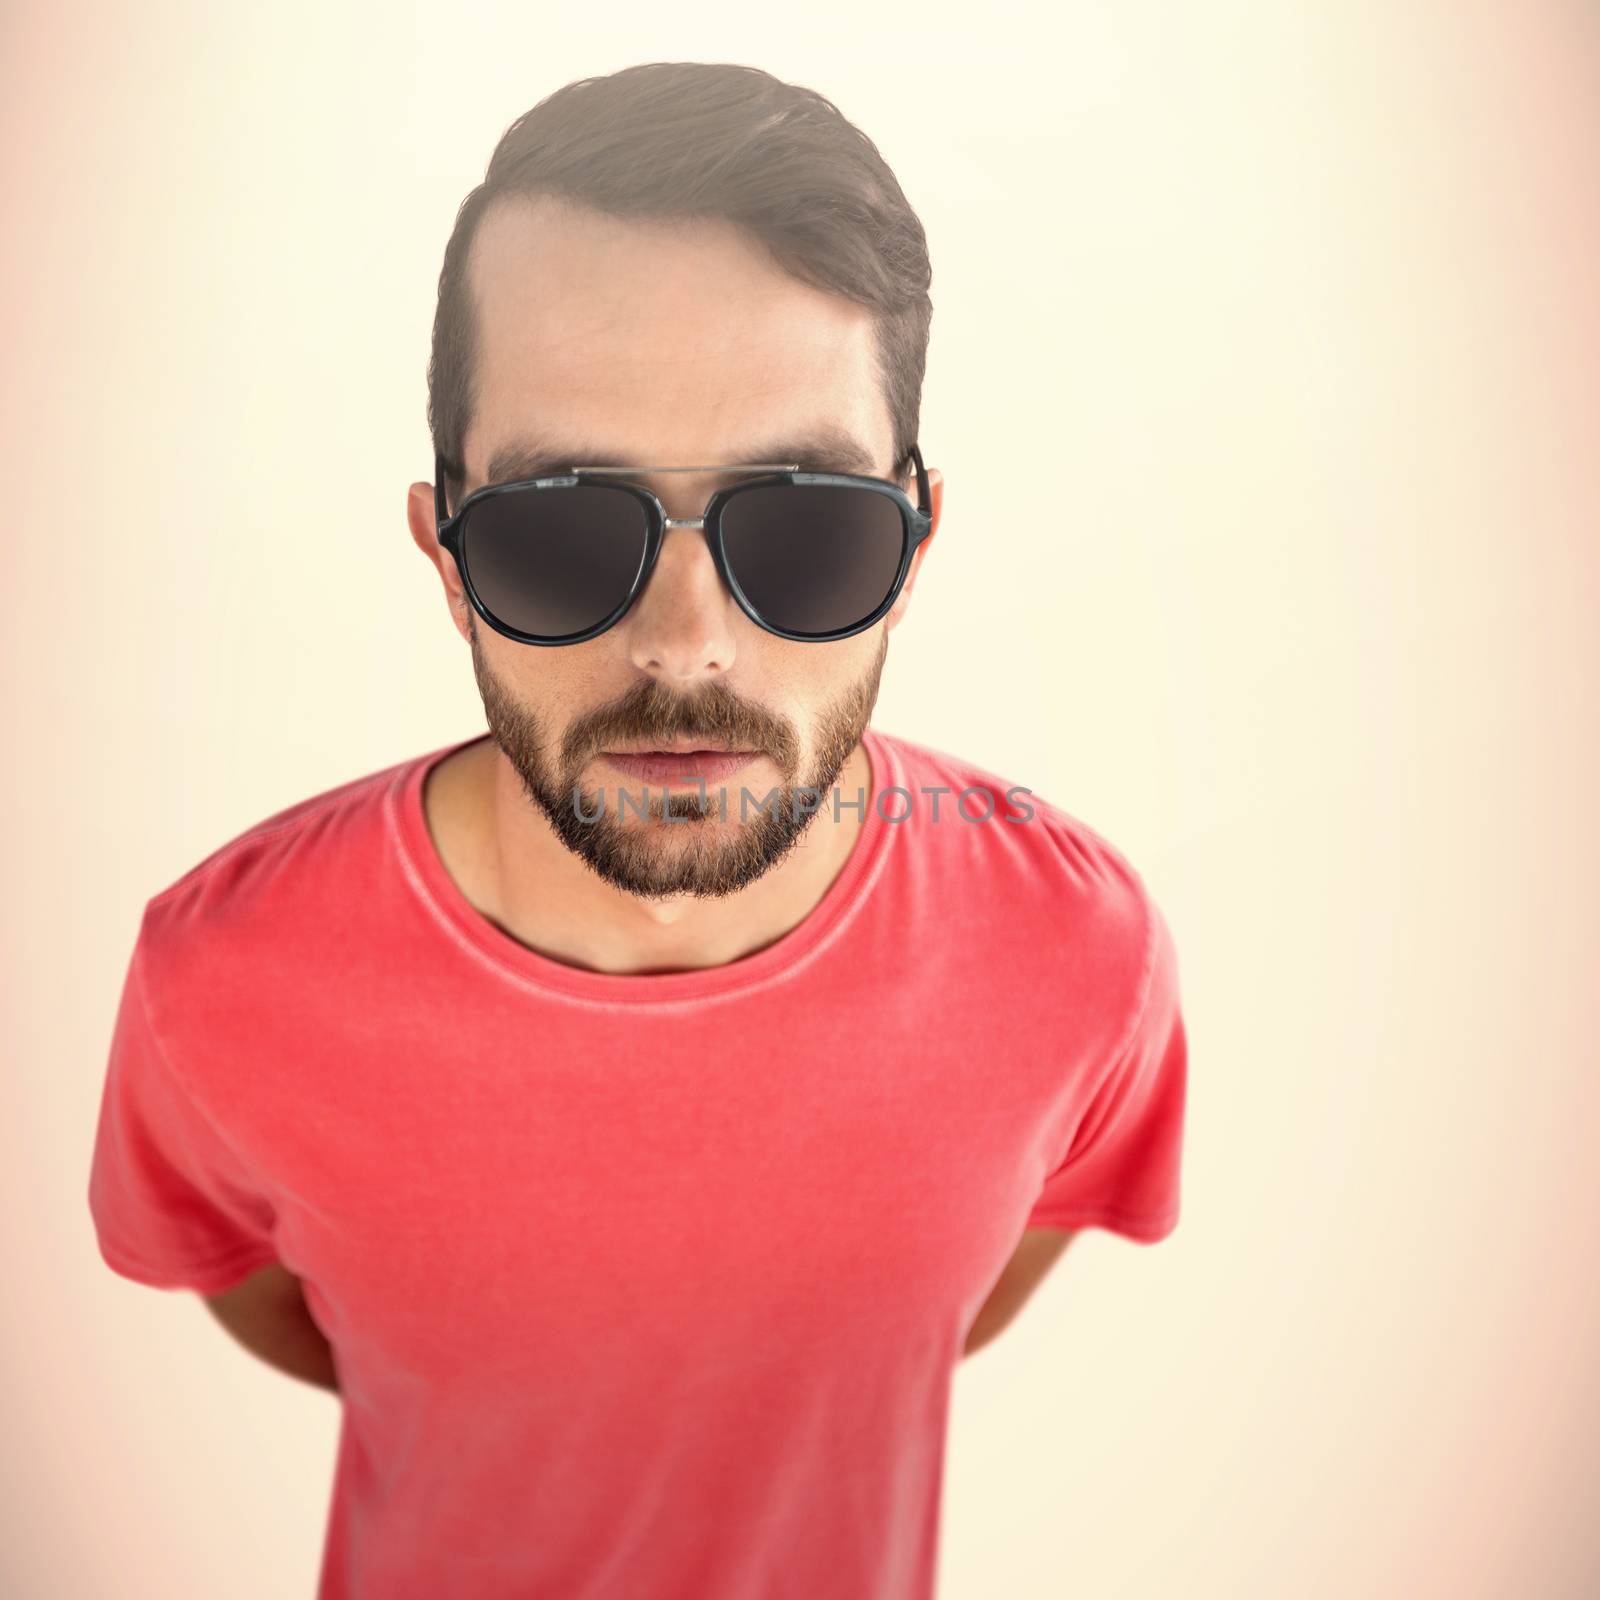 Male model in sunglasses against white background against neutral background 